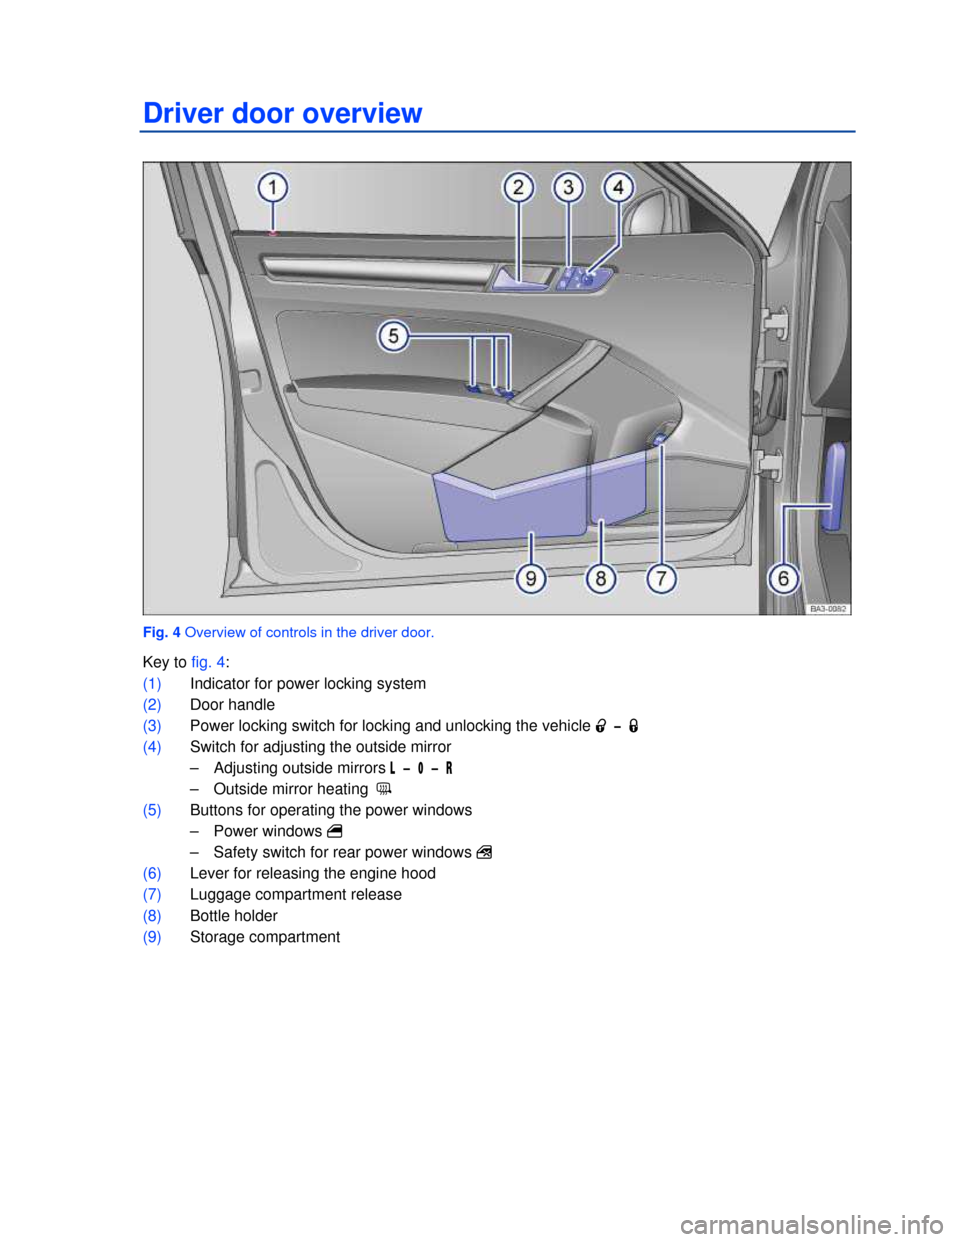 VOLKSWAGEN PASSAT 2013 B8 / 6.G Owners Manual  
Driver door overview 
 
Fig. 4 Overview of controls in the driver door. 
Key to fig. 4: 
(1) Indicator for power locking system  
(2) Door handle  
(3) Power locking switch for locking and unlocking